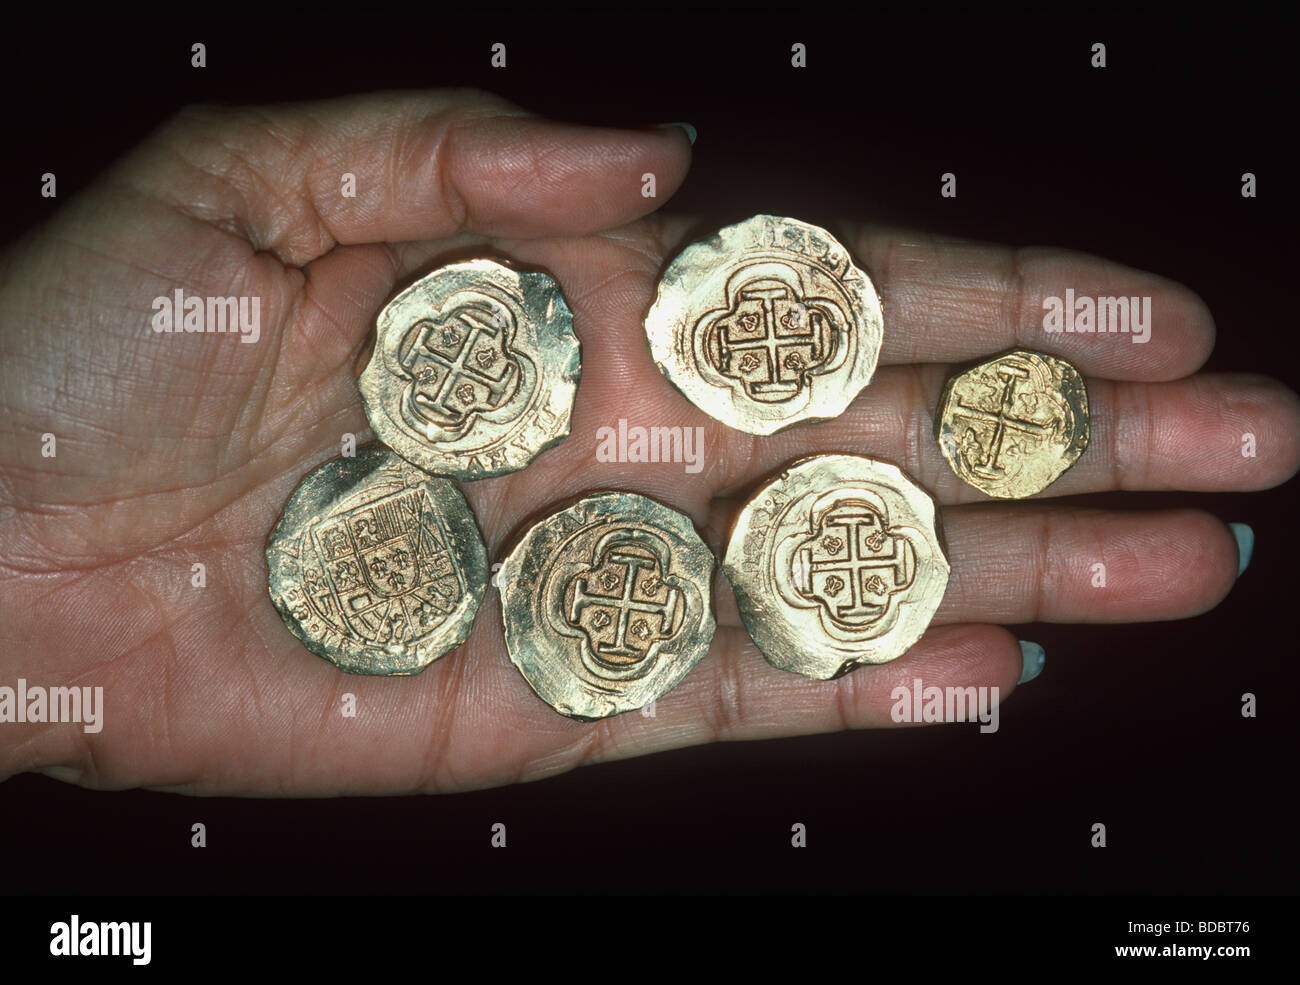 Gold Doubloons recovered from the shipwreck Las Maravillas sunk in 1658 Bahamas  Stock Photo